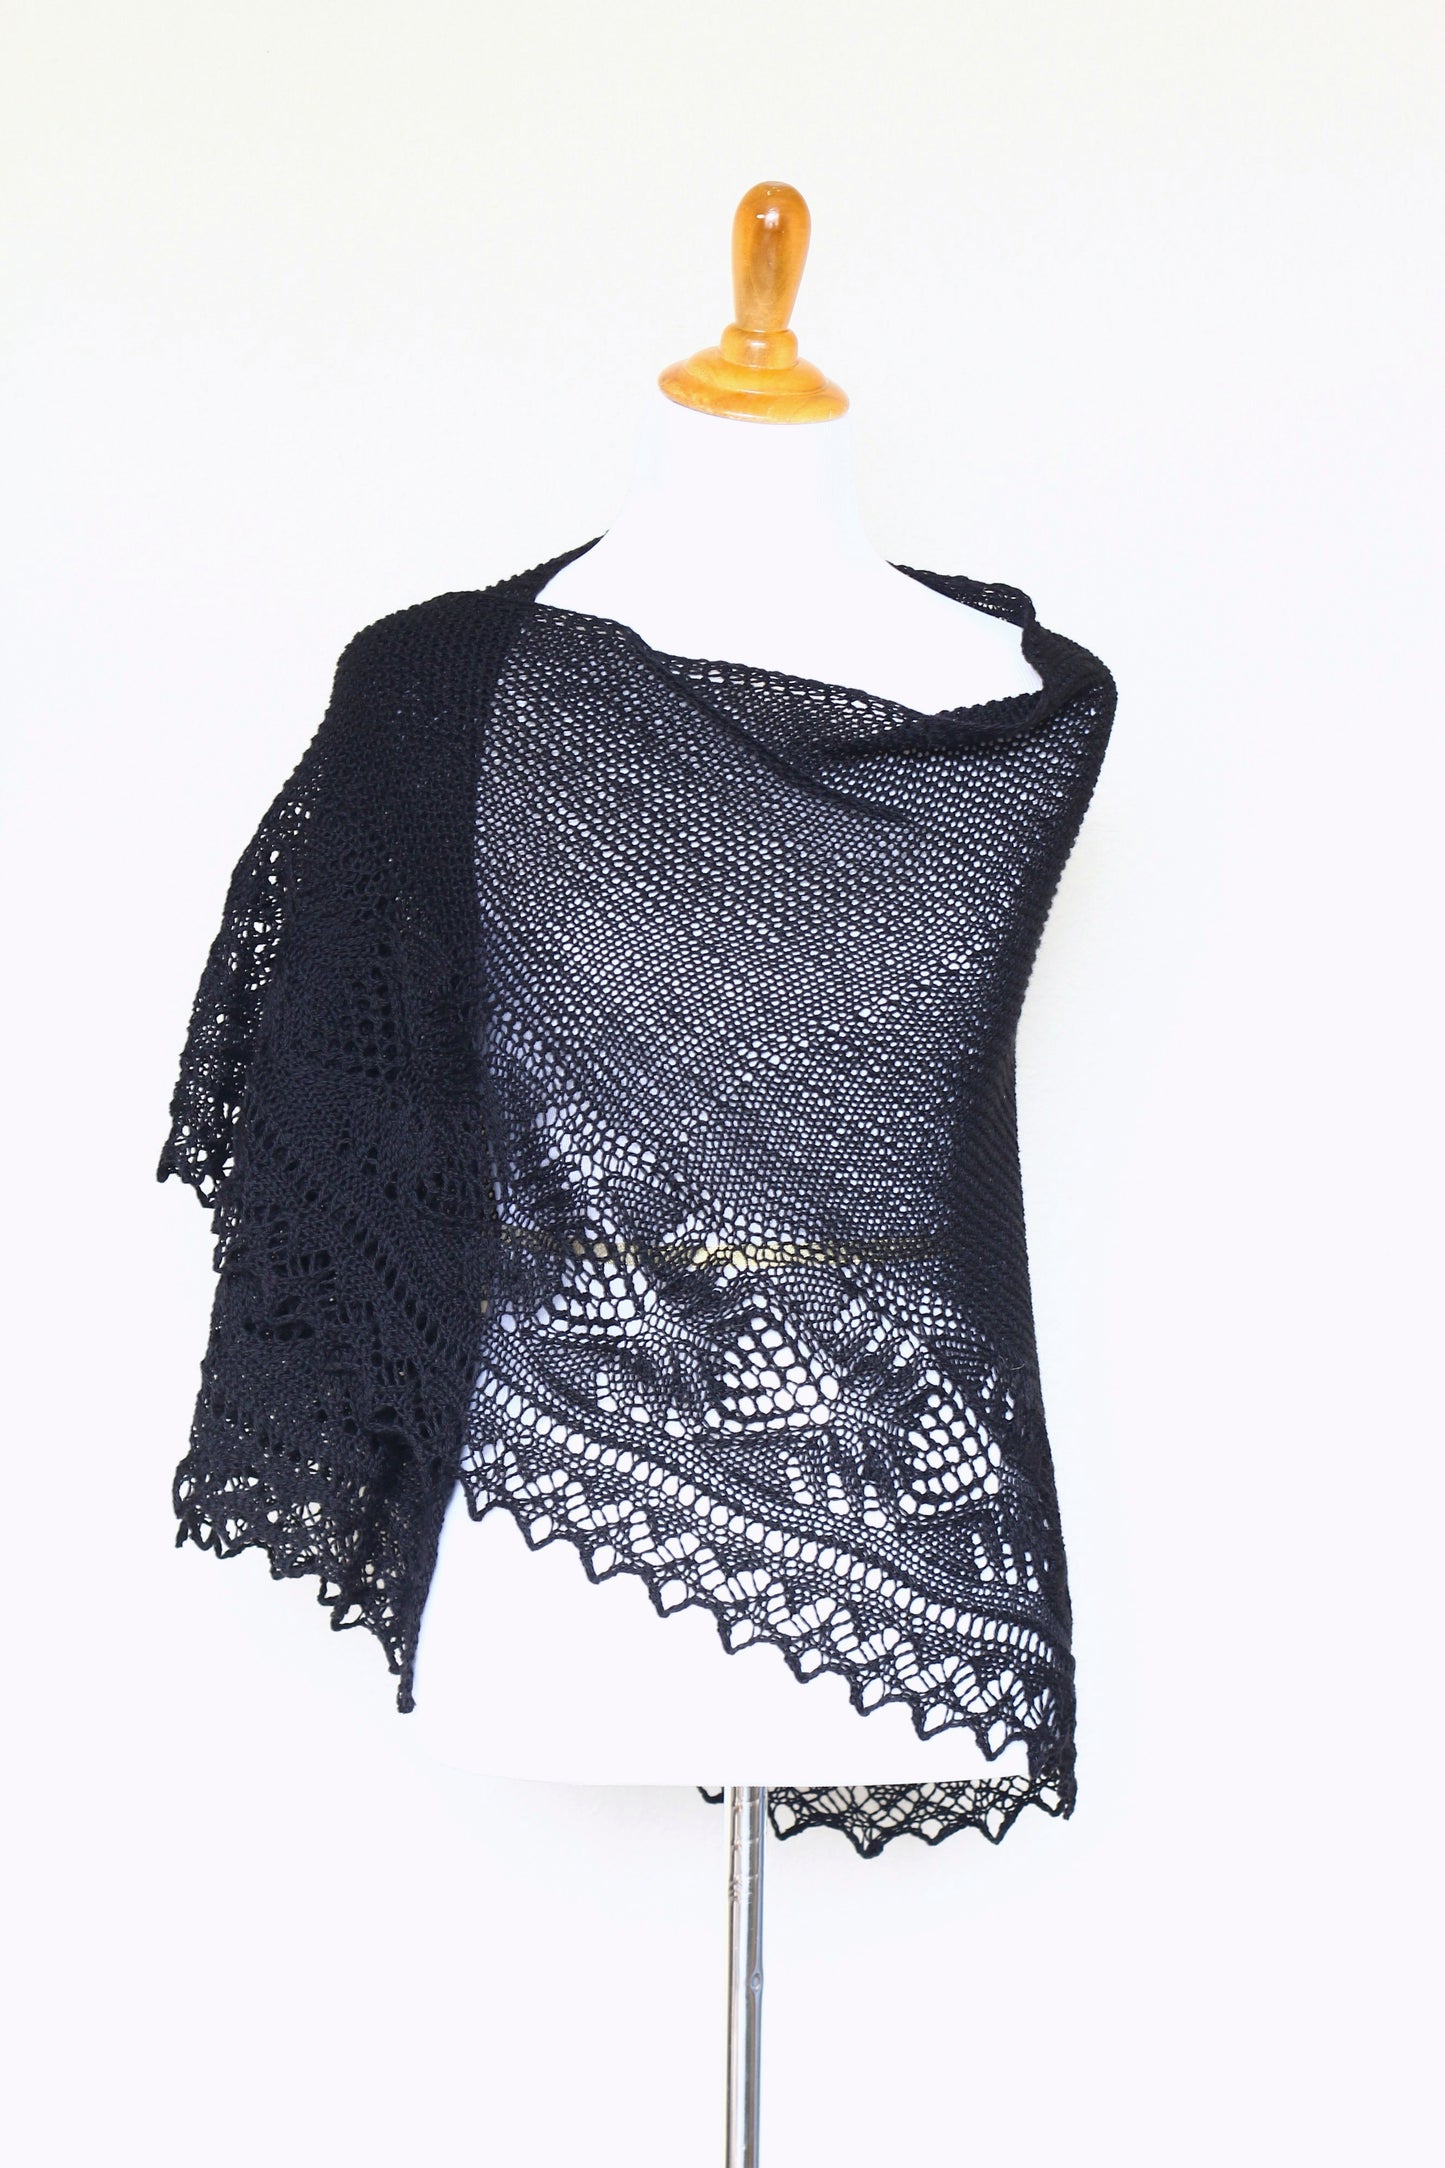 Knit shawl with laced border in black color